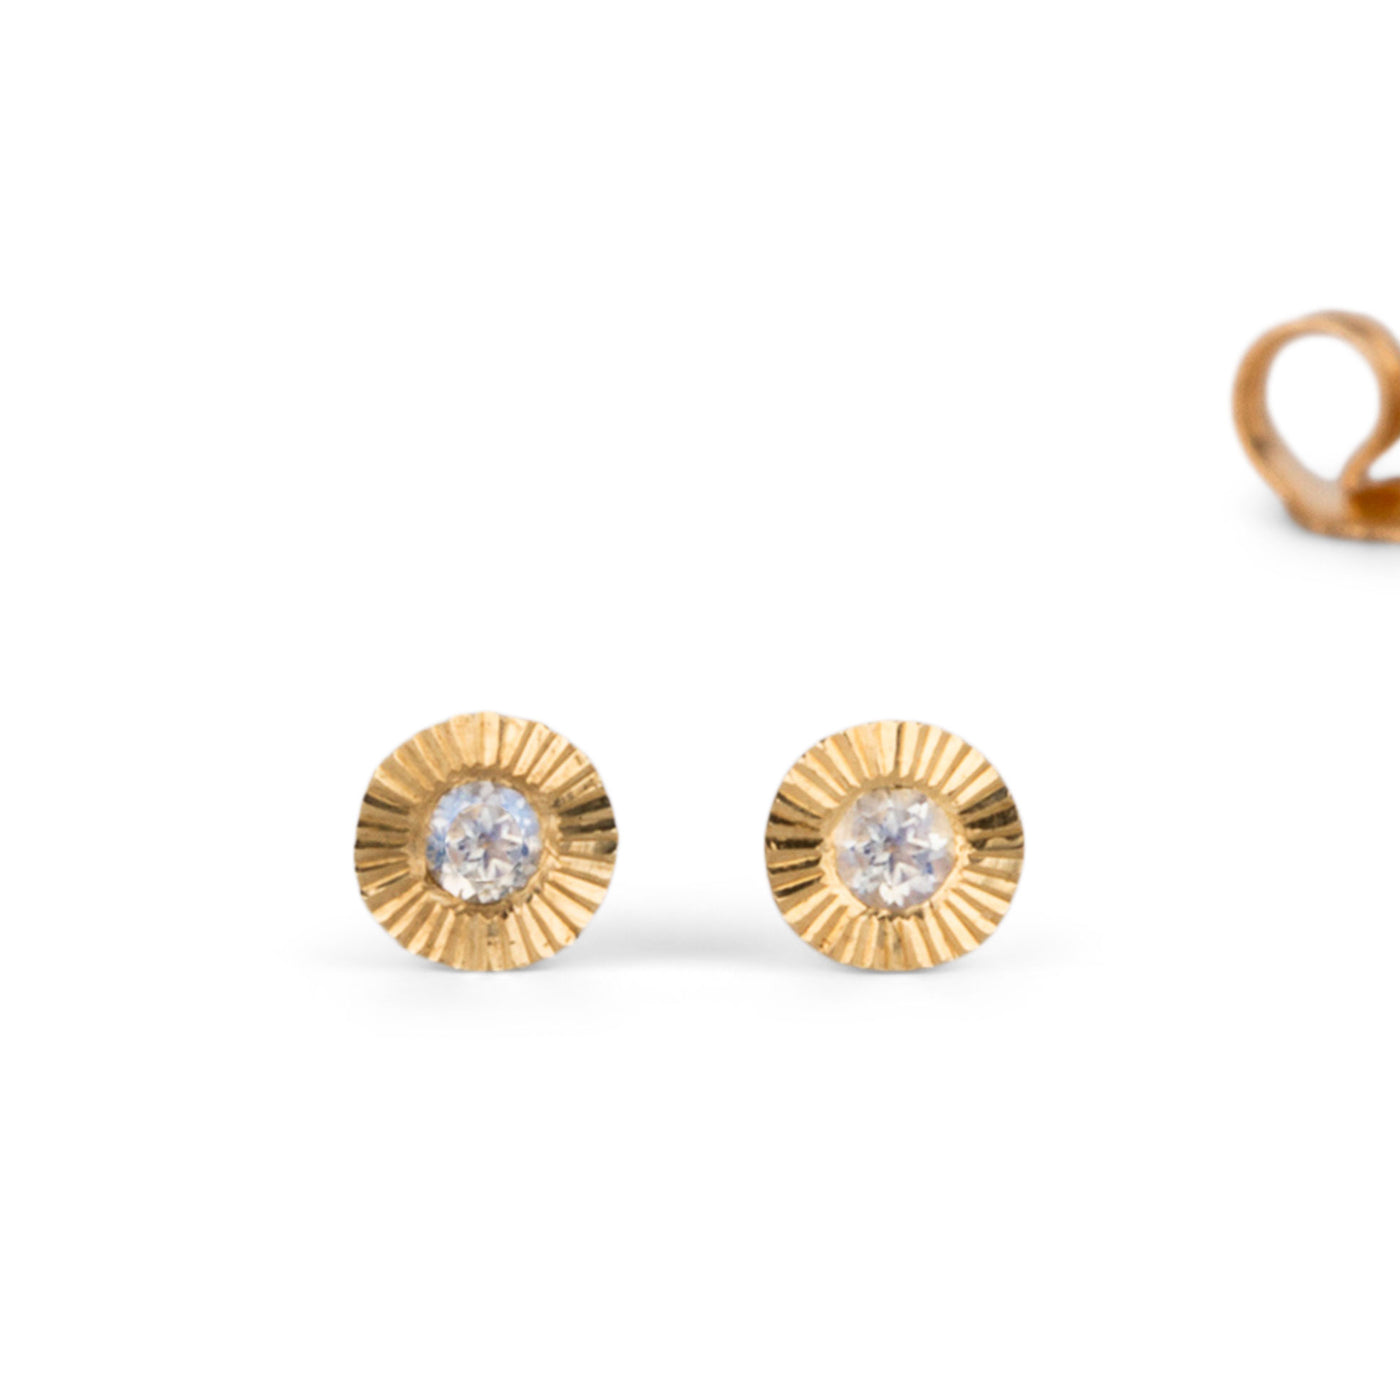 Small yellow gold Aurora engraved stud earrings with moonstone centers on a white background